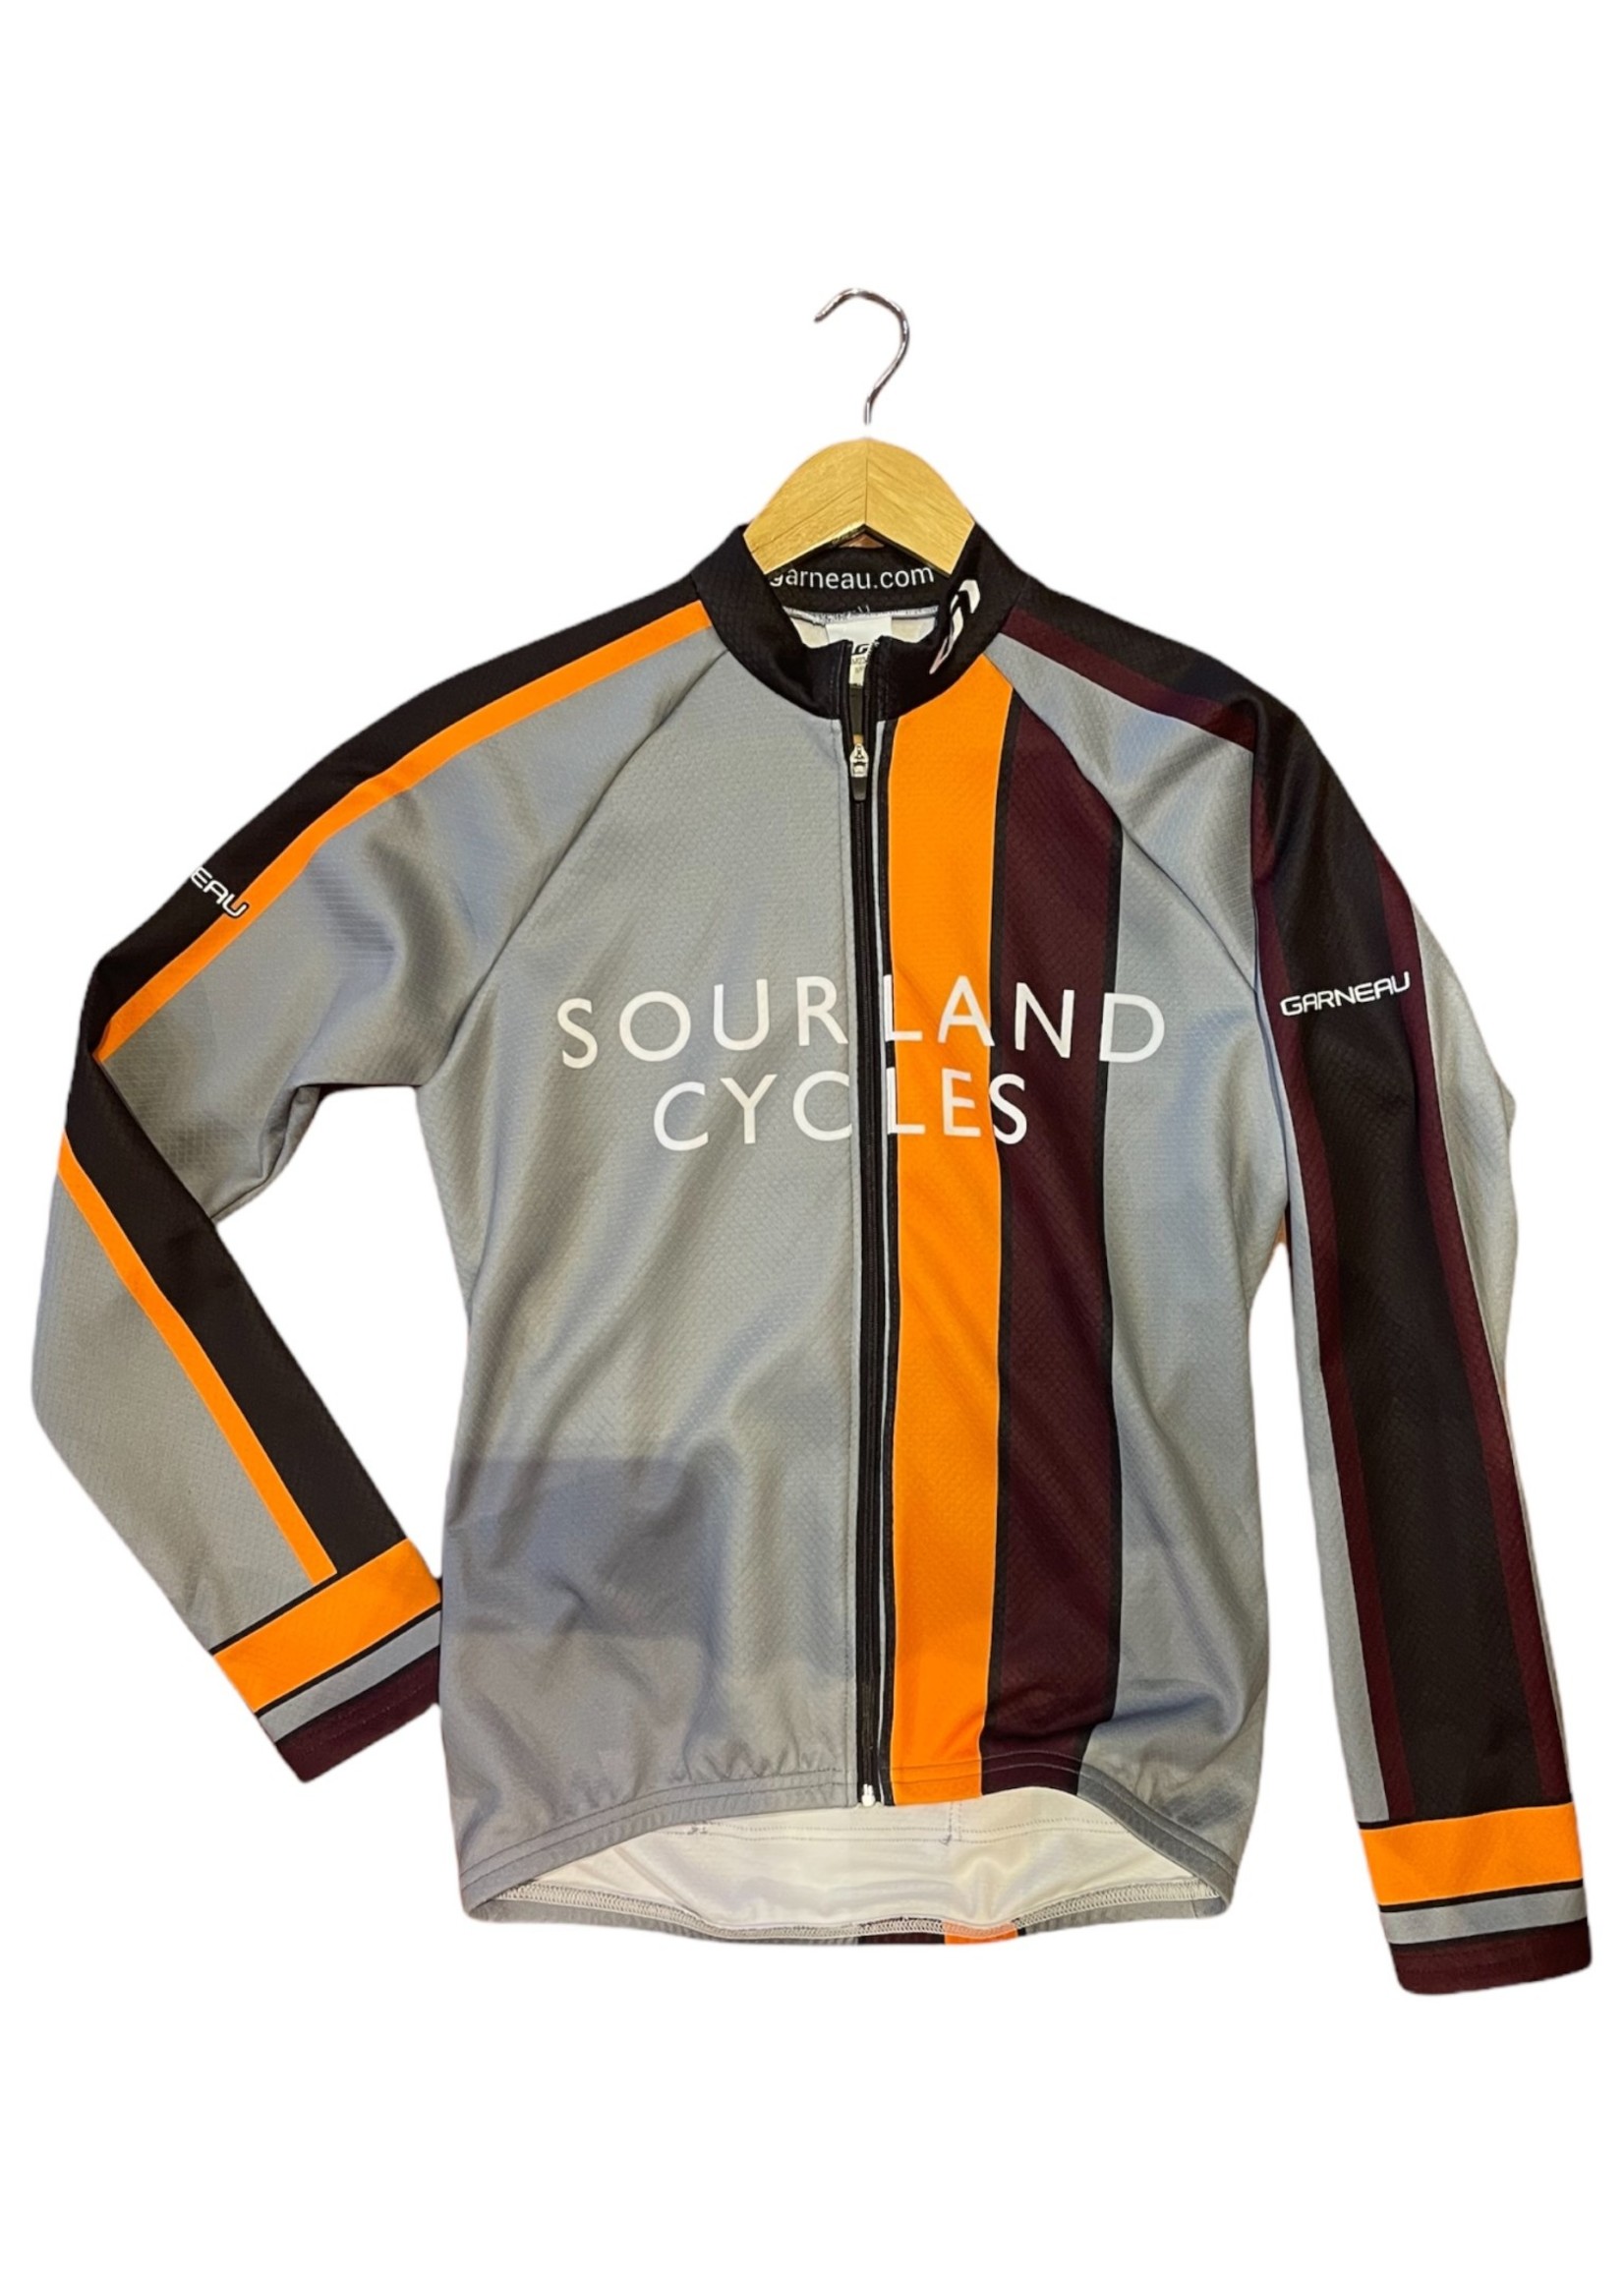 Pactimo Sourland Men's Fleece without sidepanel